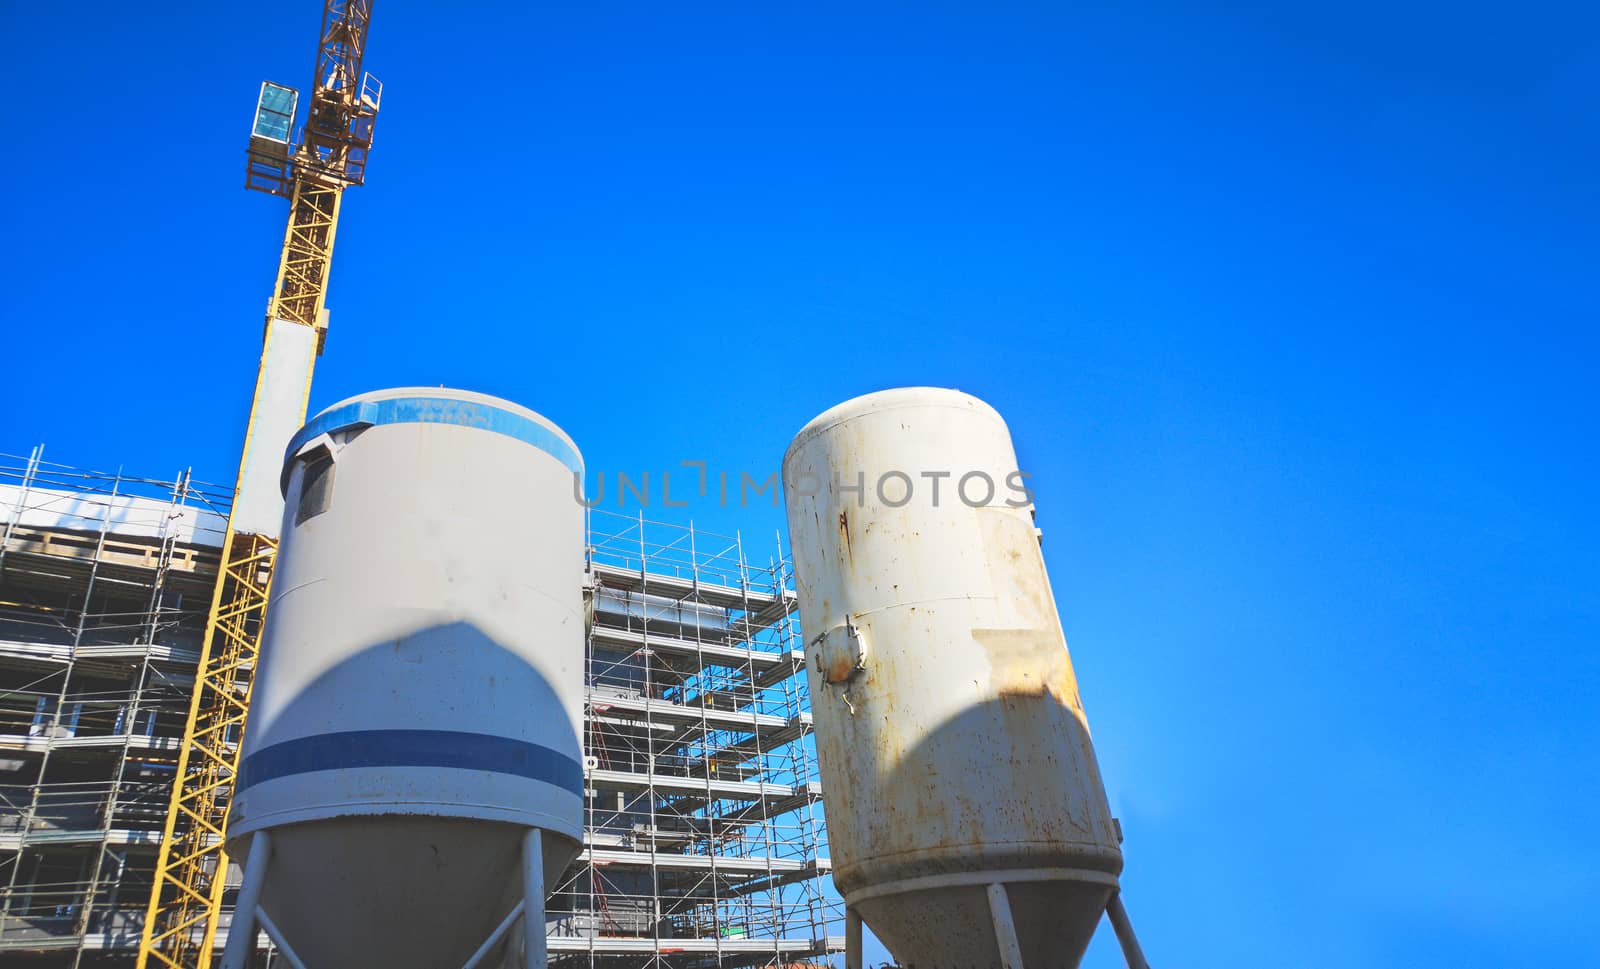 mortar silos at construction site with crane and blue sky by LucaLorenzelli